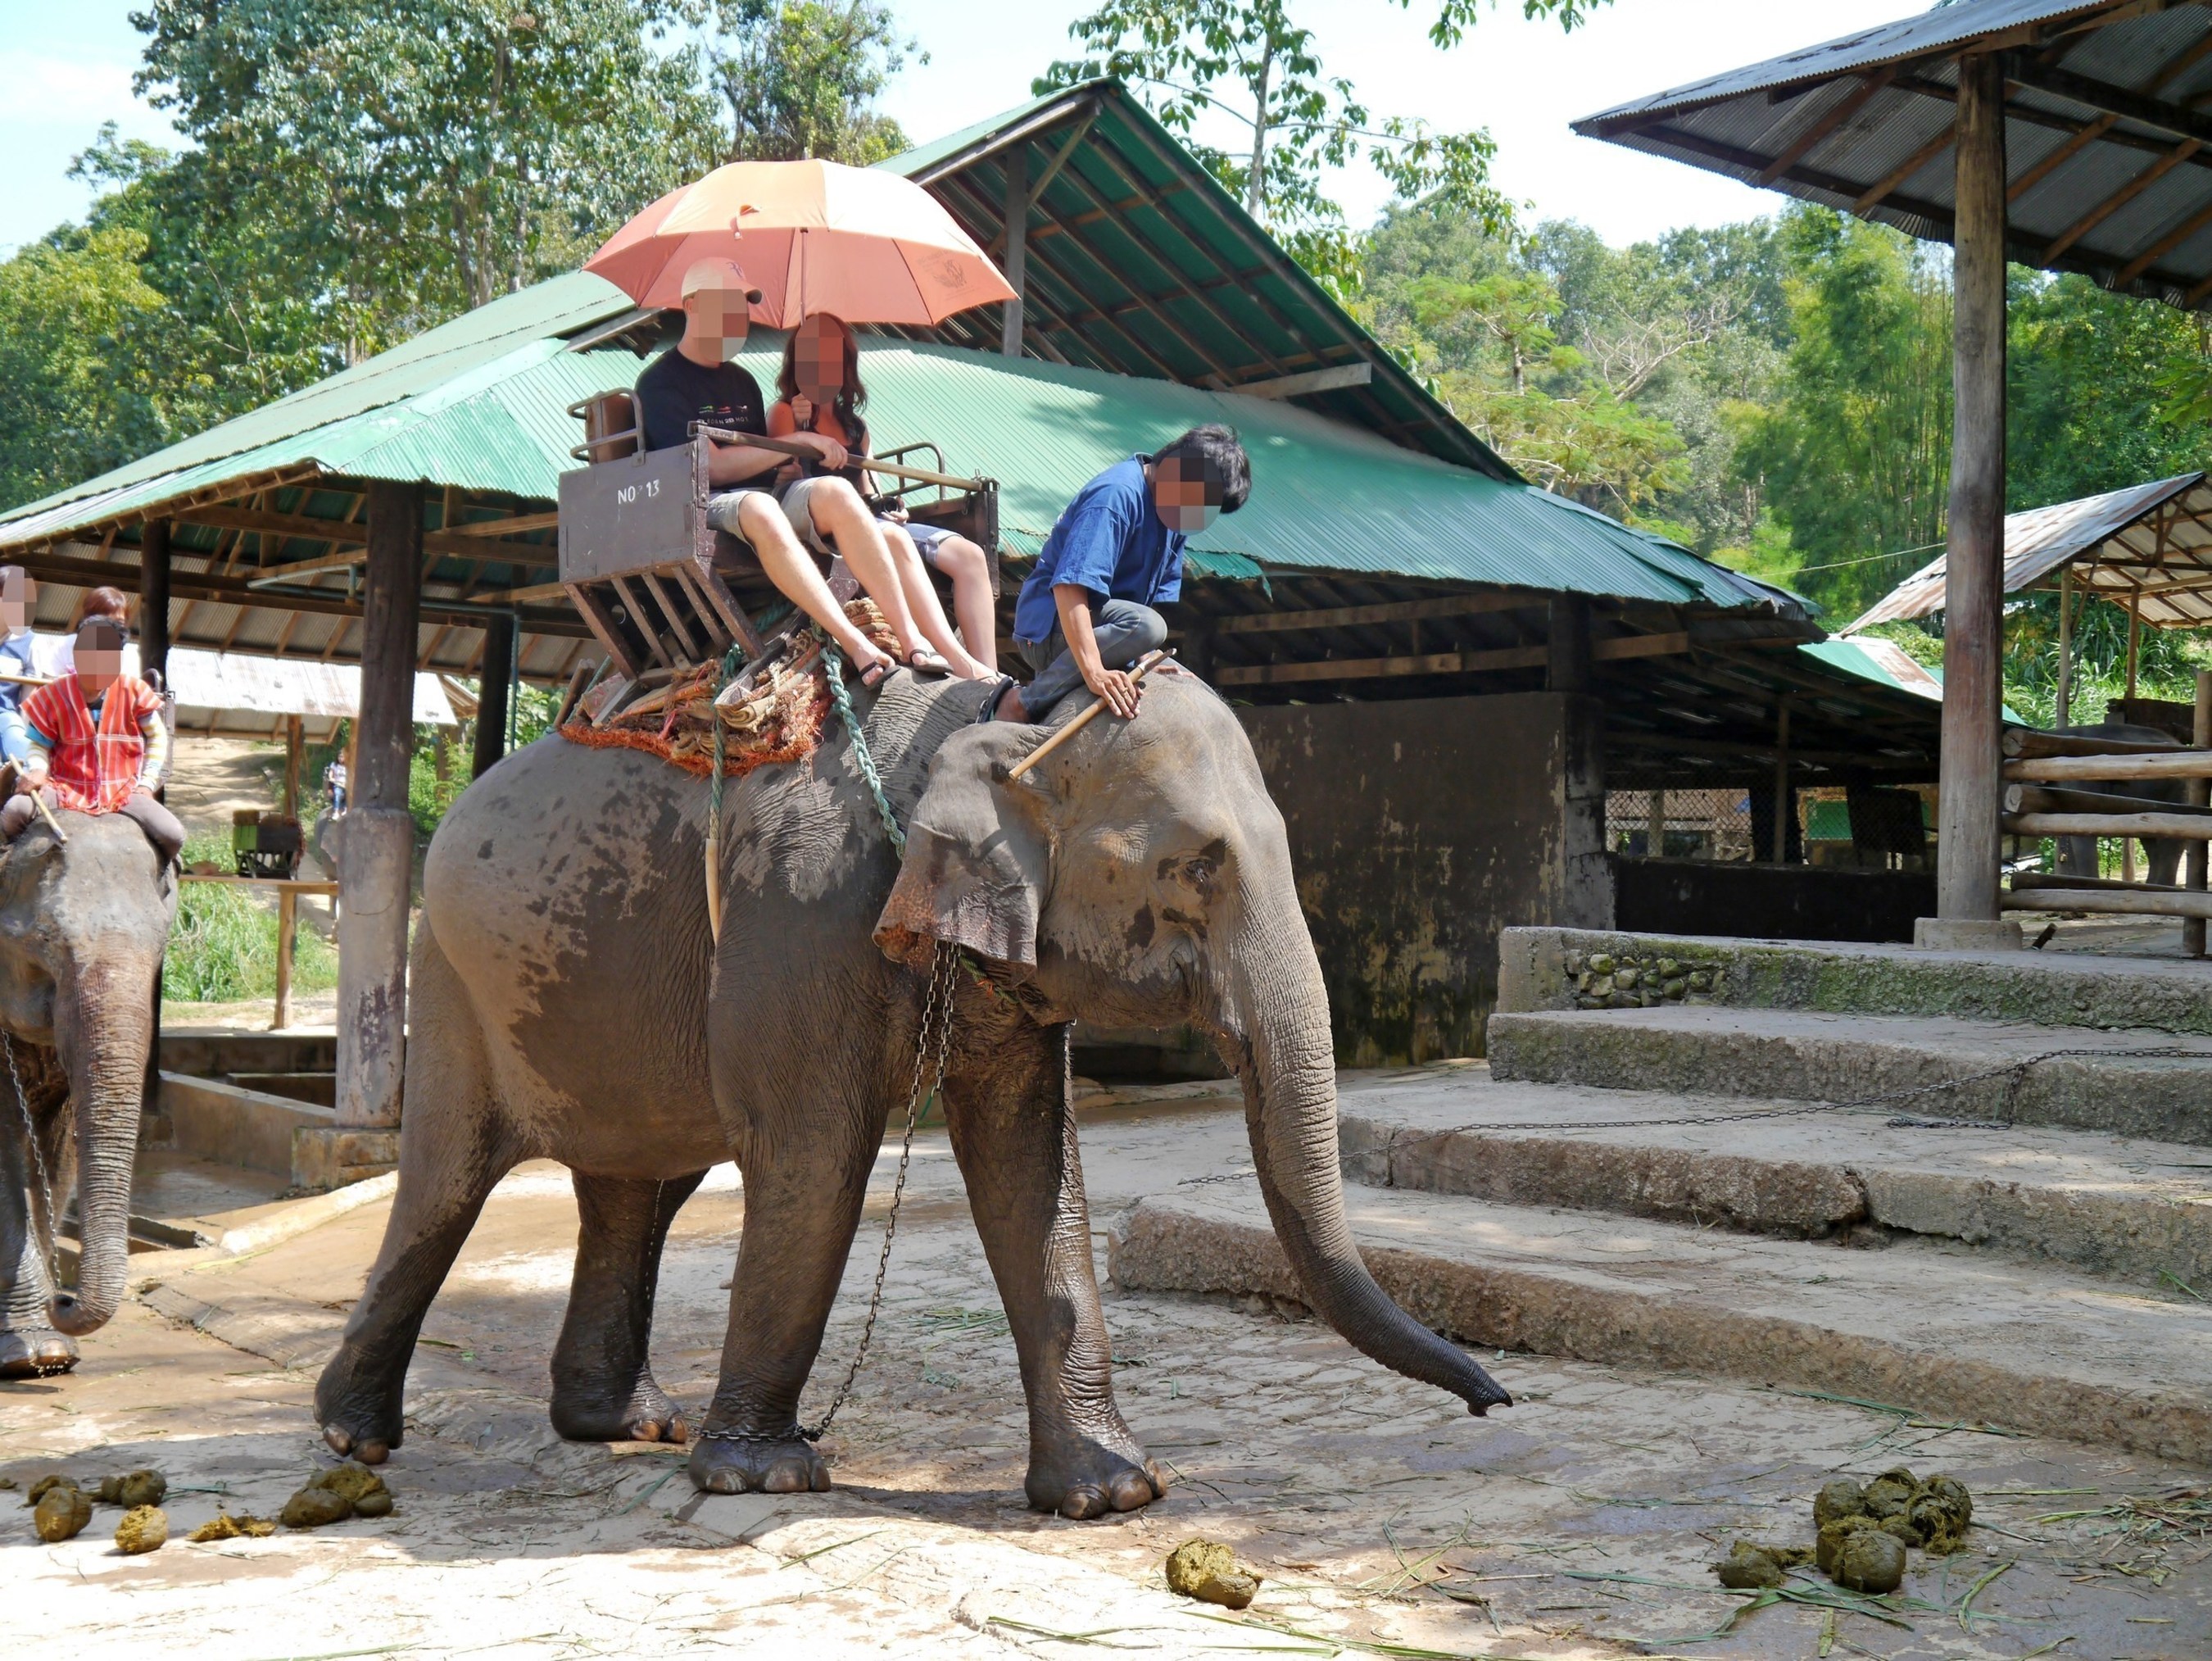 An Asian elephant used to take tourists for rides. World Animal Protection believes that wild animals belong in the wild and should not be used for entertainment.